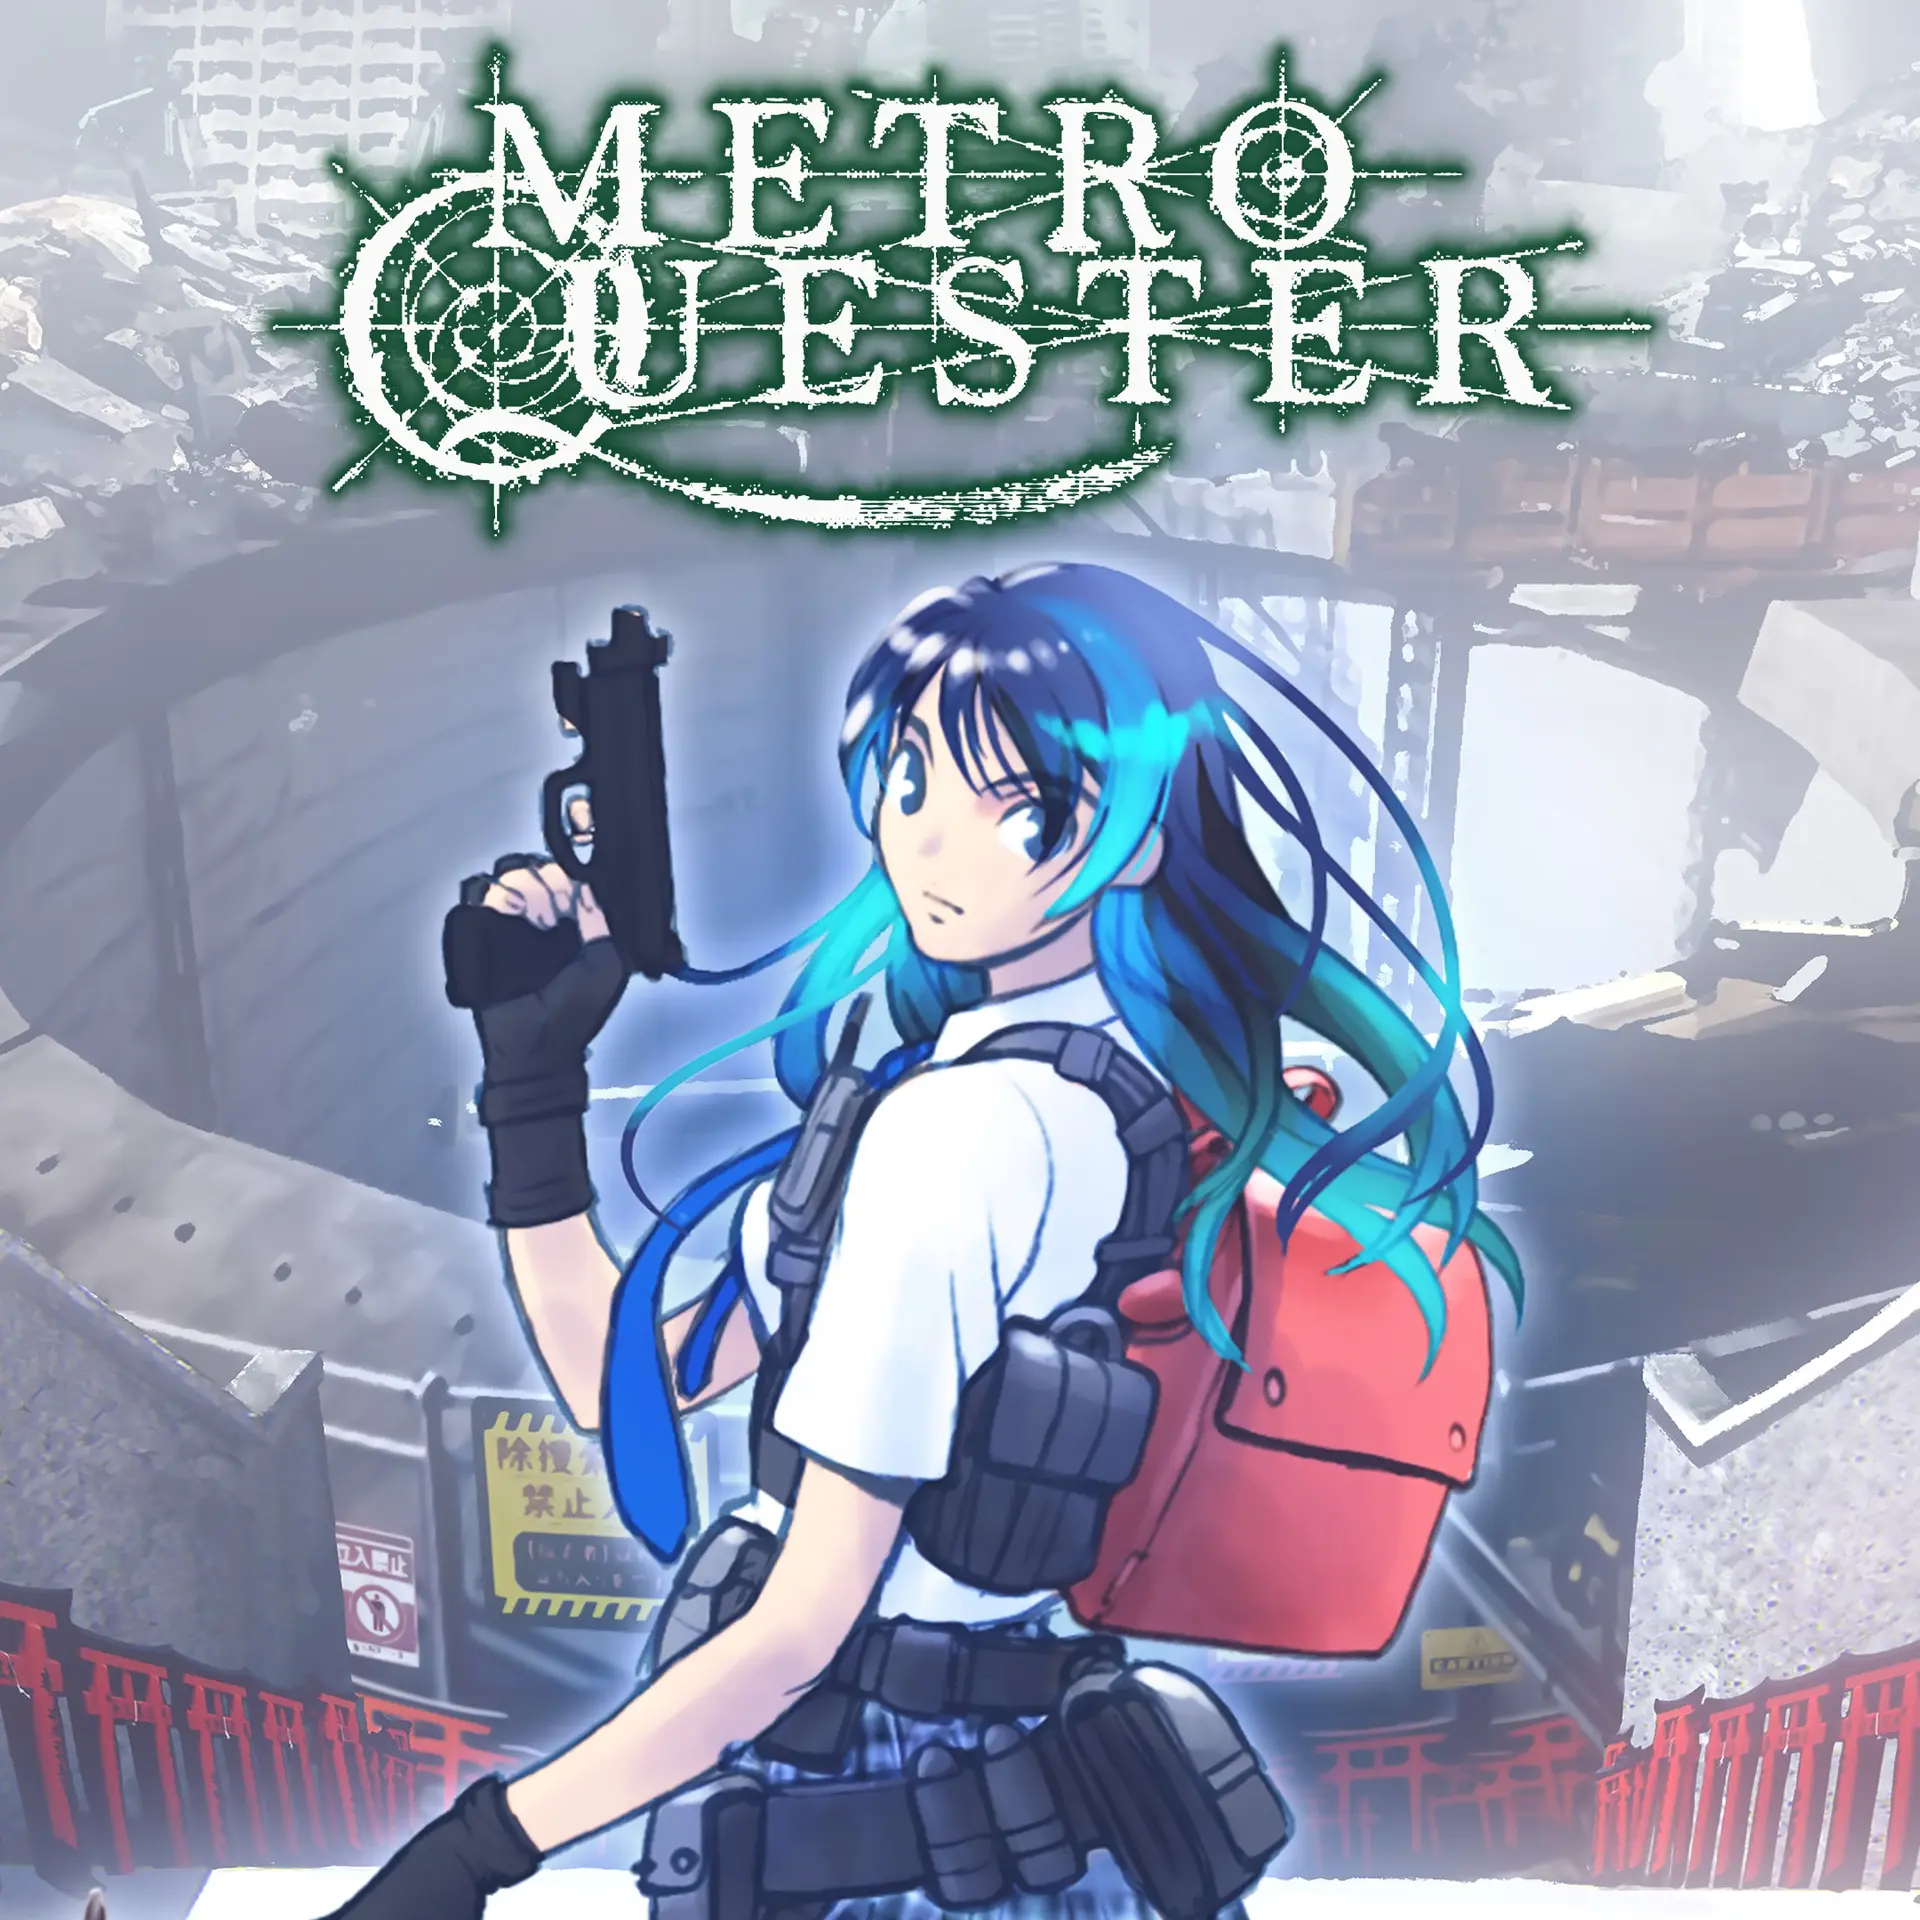 METRO QUESTER (XBOX One - Cheapest Store)